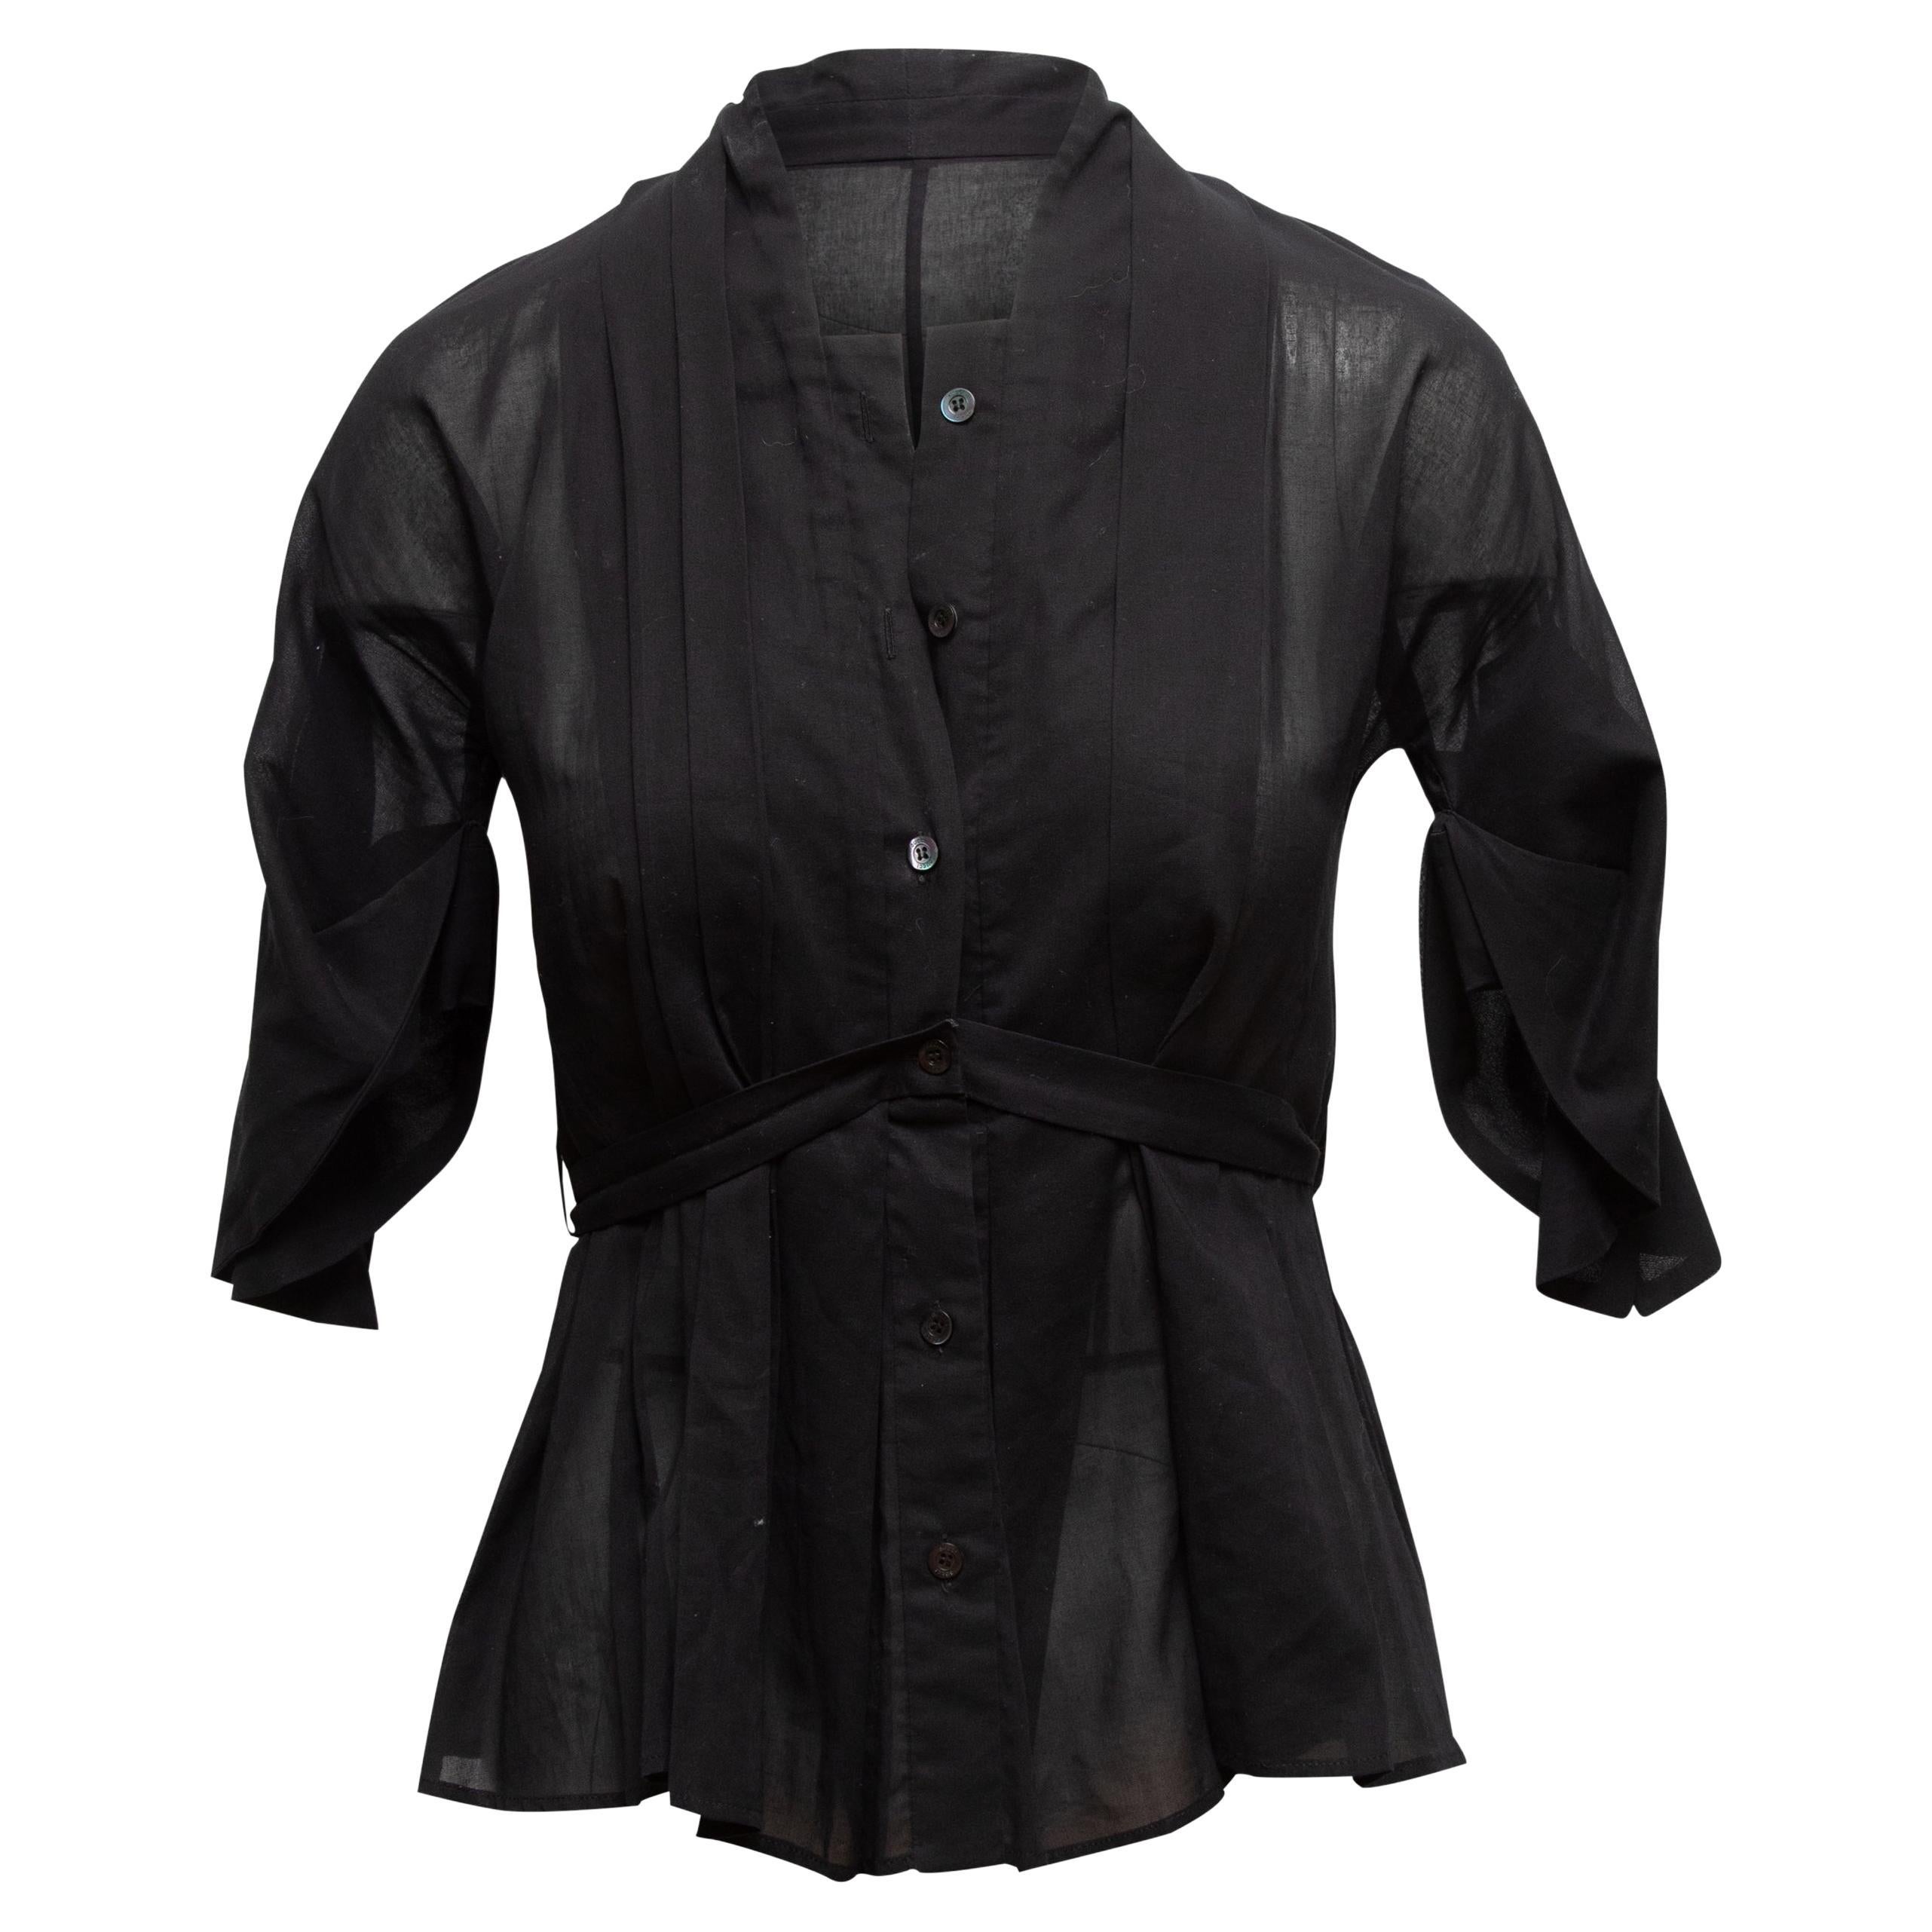 Black cotton three-quarter sleeve button-up top by Gucci. Square neckline. Tie accent at waist. Button closures at center front. Designer size 40. 36